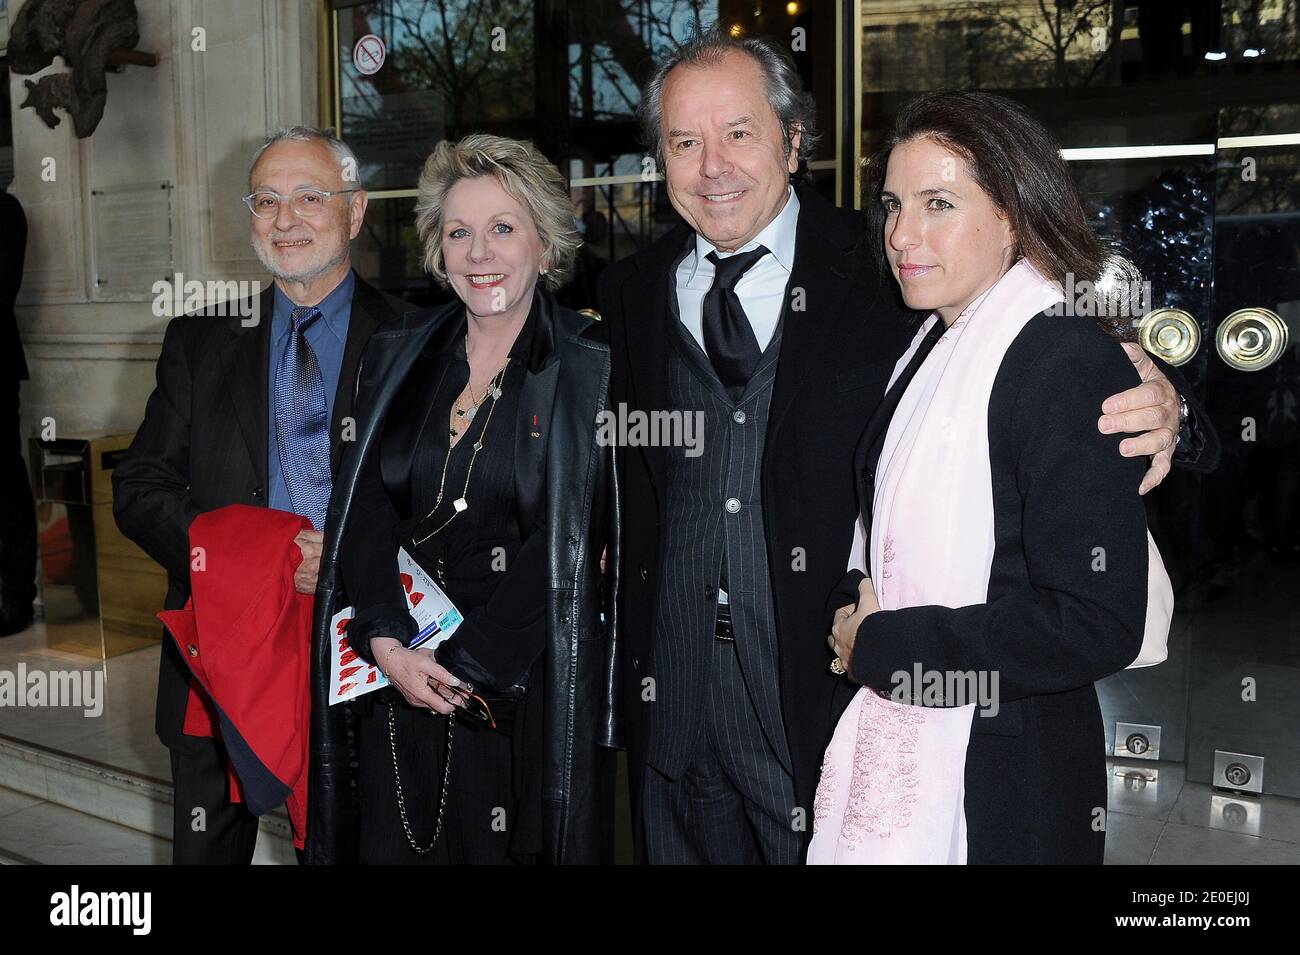 Francoise Laborde and husband Jean-Claude Paris with Christian Morin and  companion attending the 18th Annual Gala 'Musique contre l'Oubli' to  benefit Amnesty International held at the Theatre du Chatelet in Paris,  France,